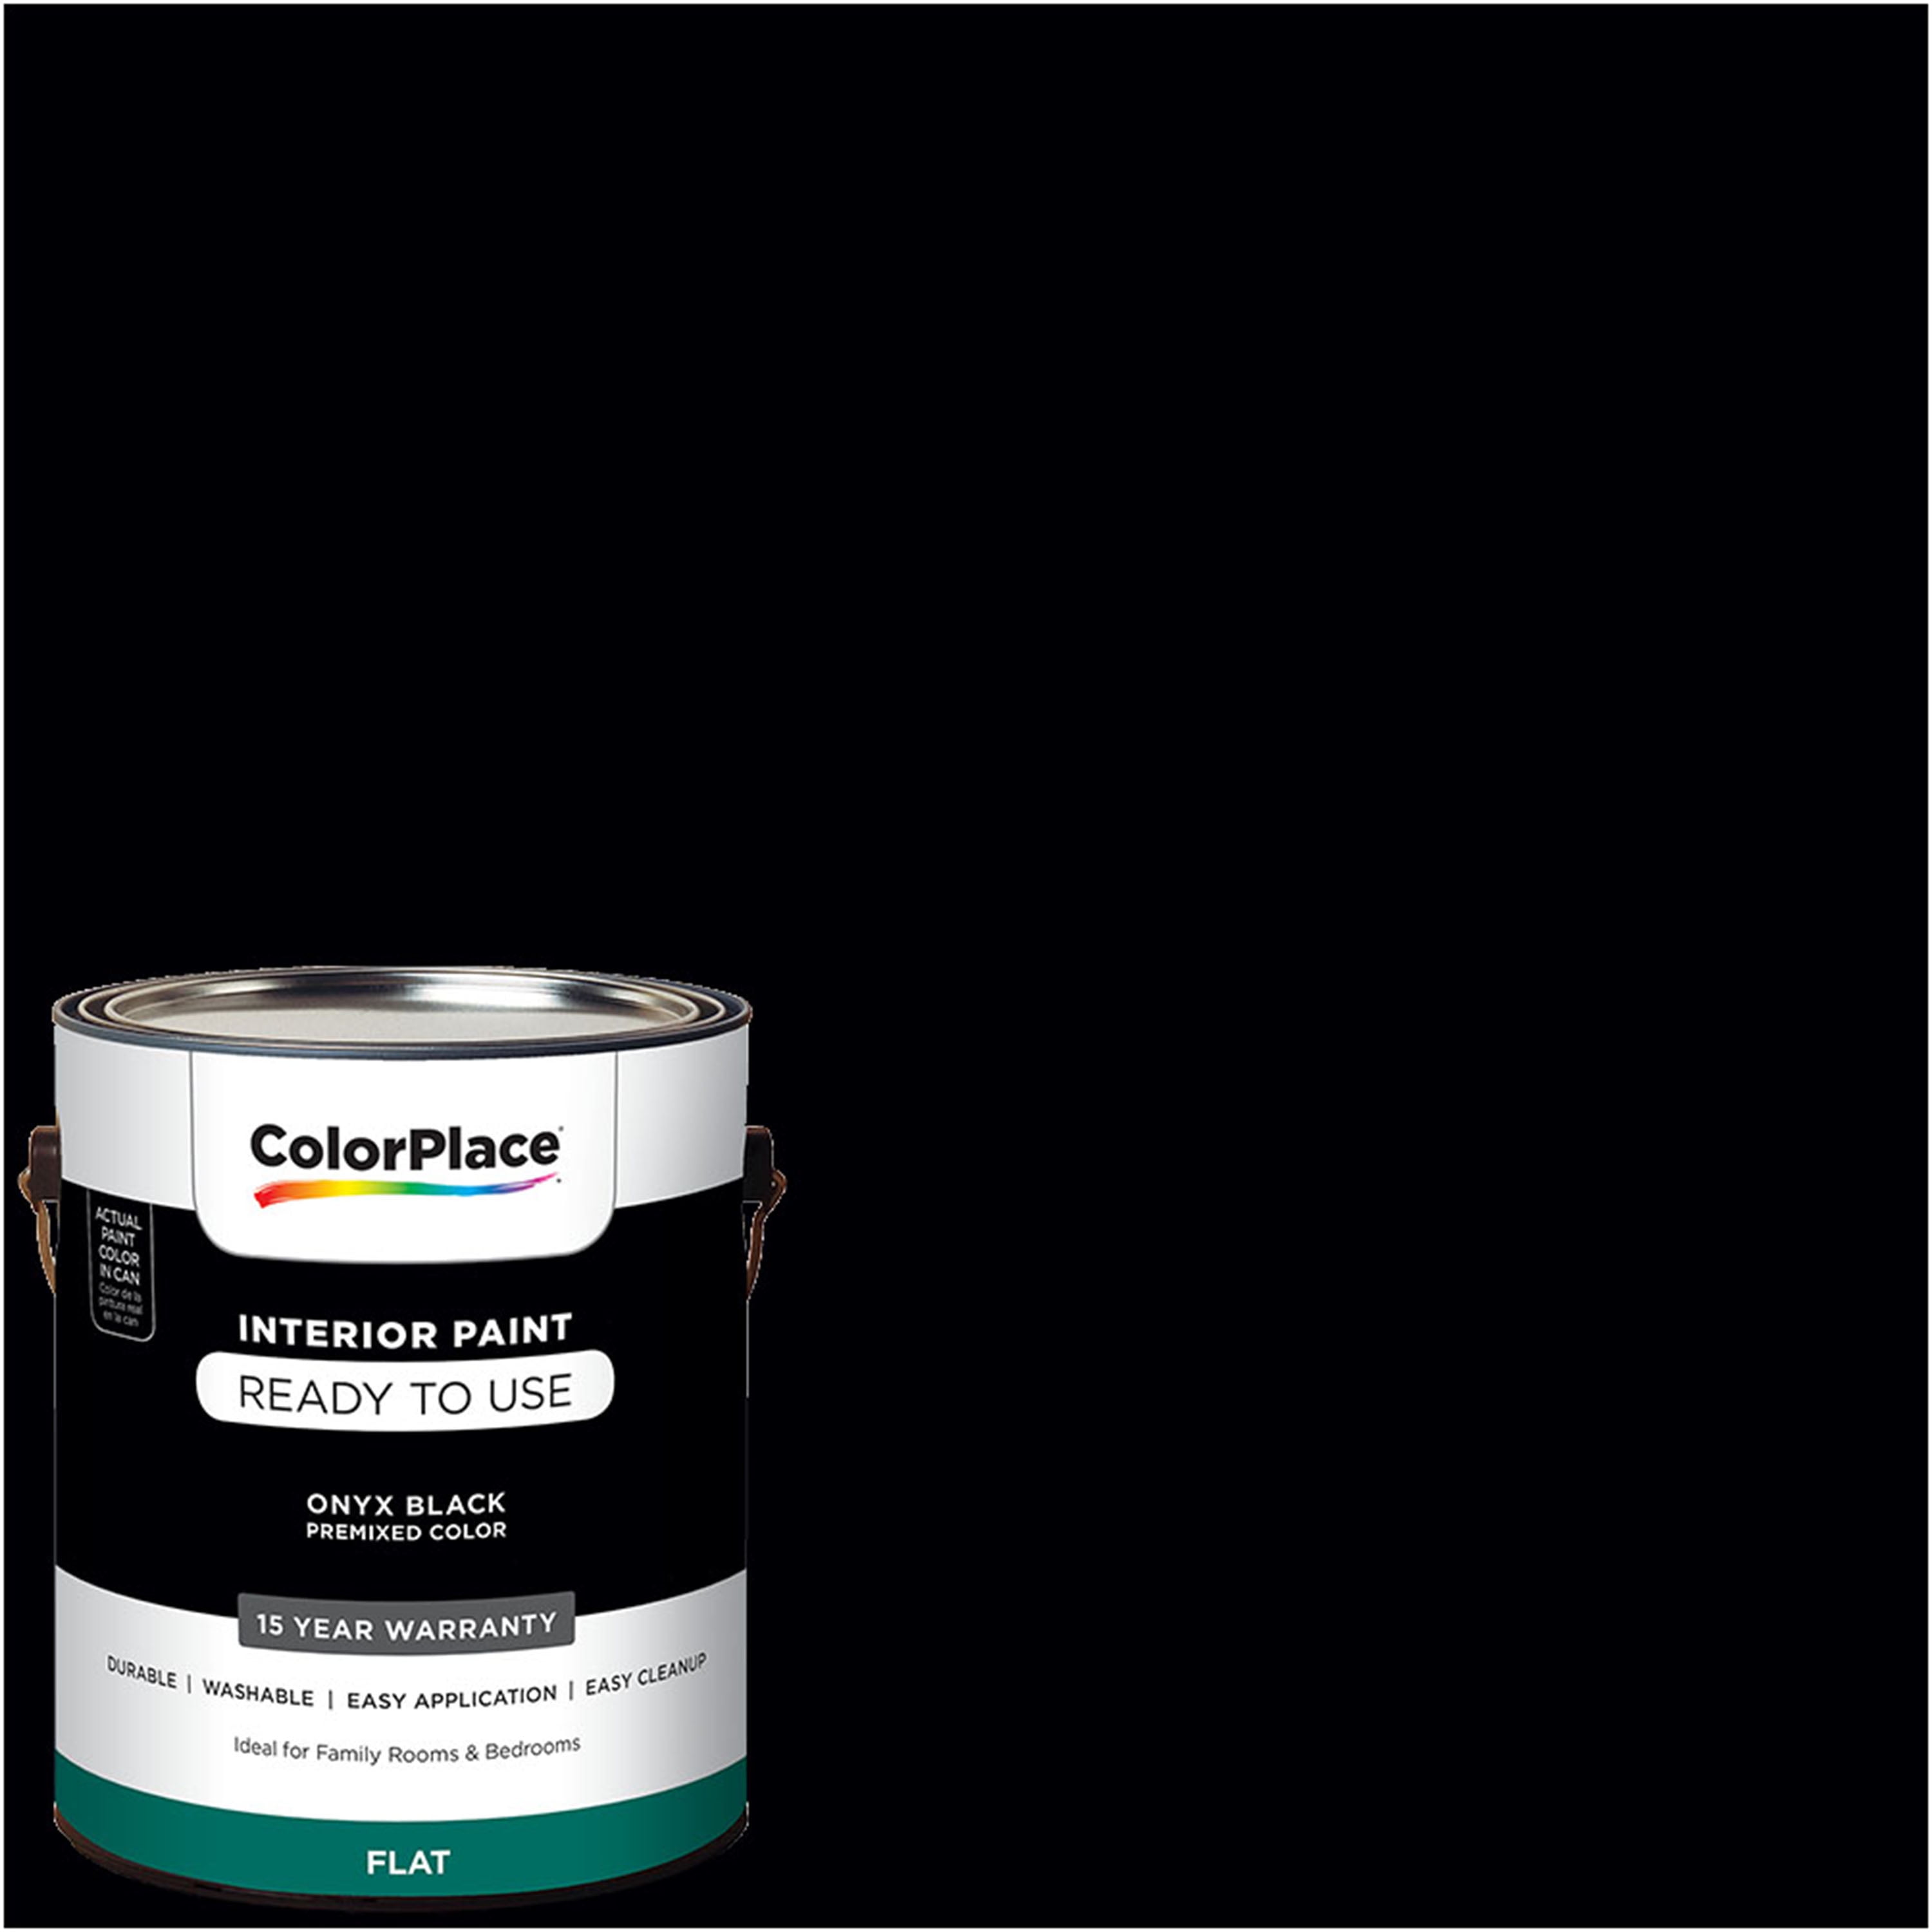 ColorPlace Ready to Use Interior Paint, Onyx Black, 1 Gallon, Flat ...